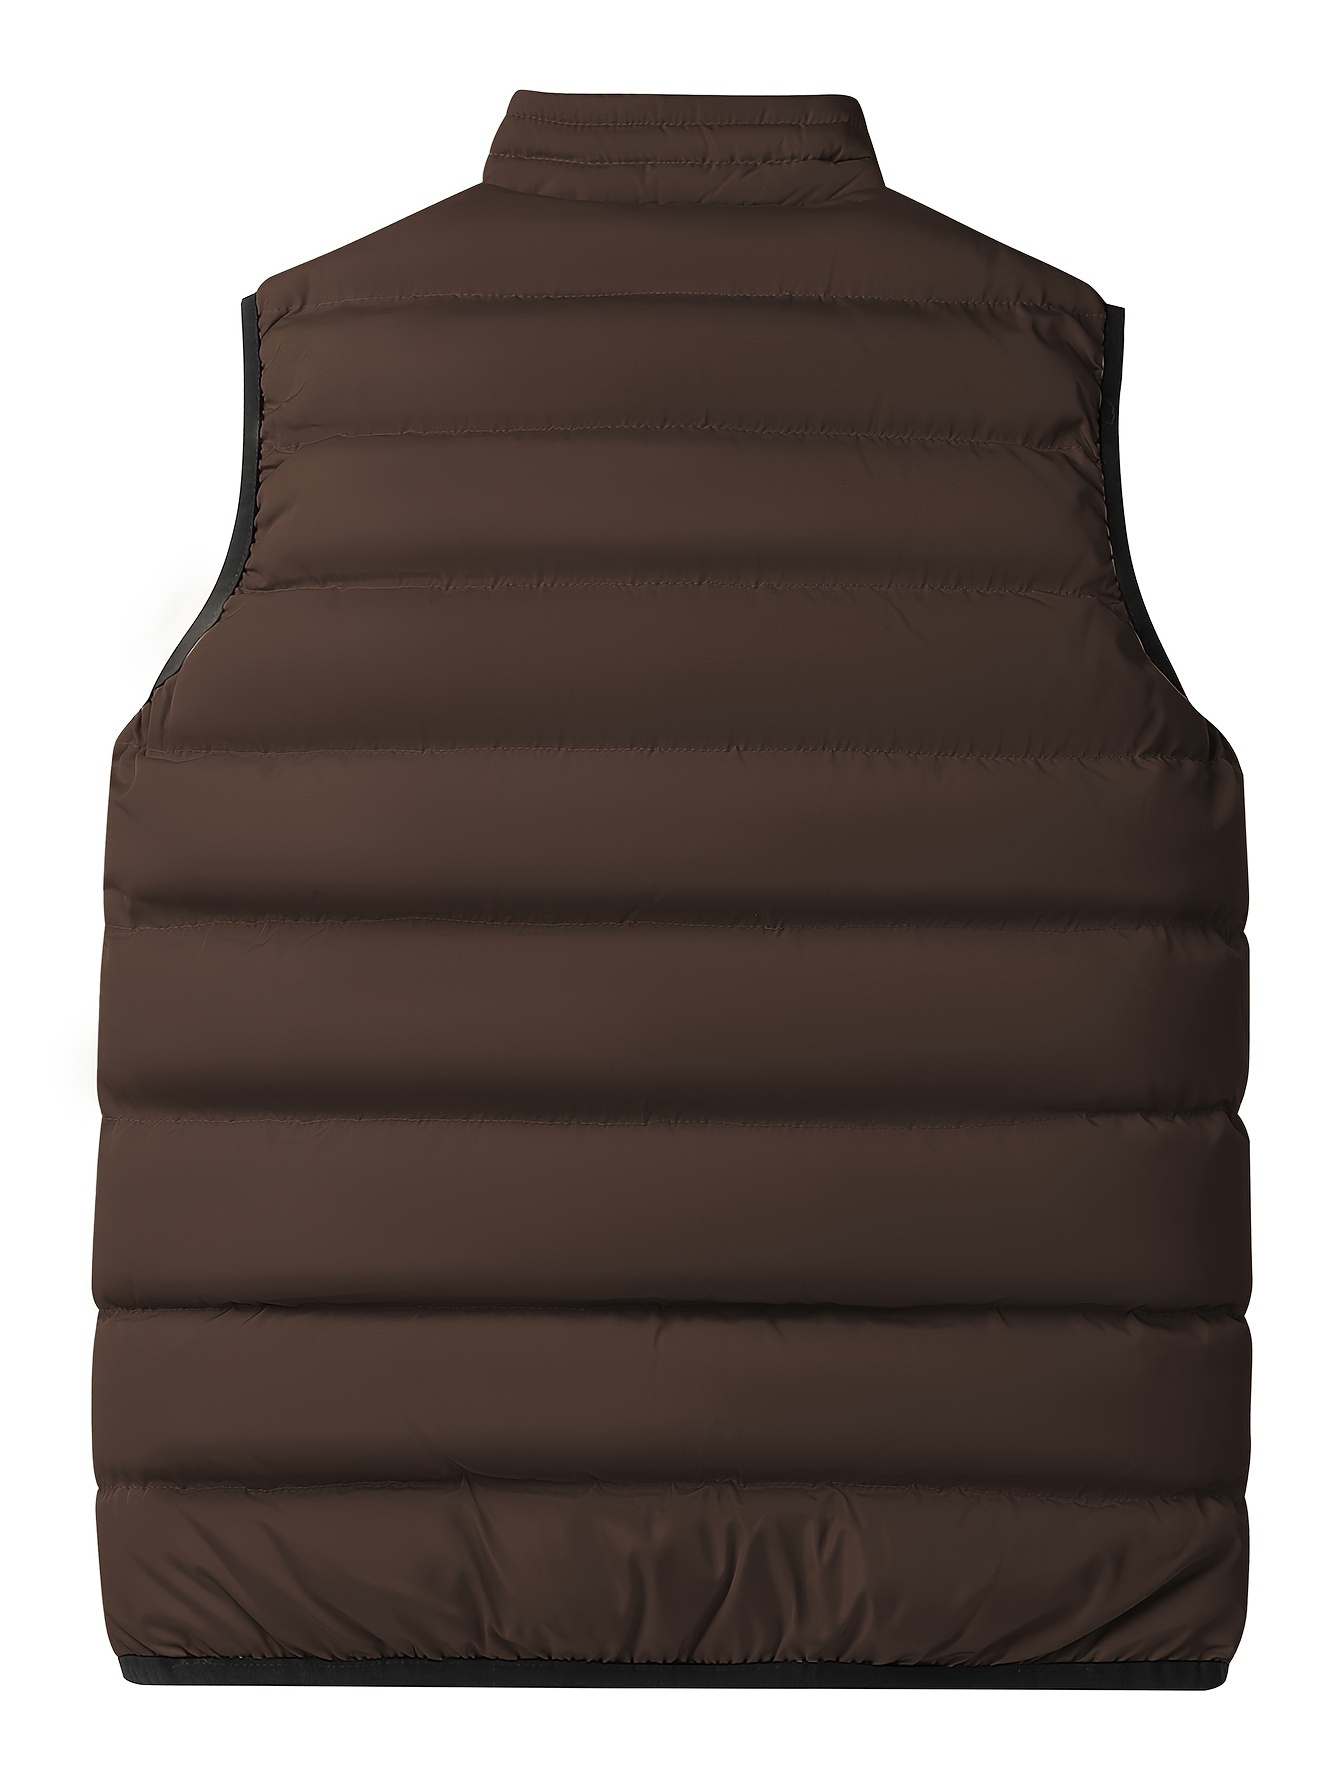 Men's Winter Warm Down Quilted Vest Body Sleeveless Padded Jacket Coat  Outwear